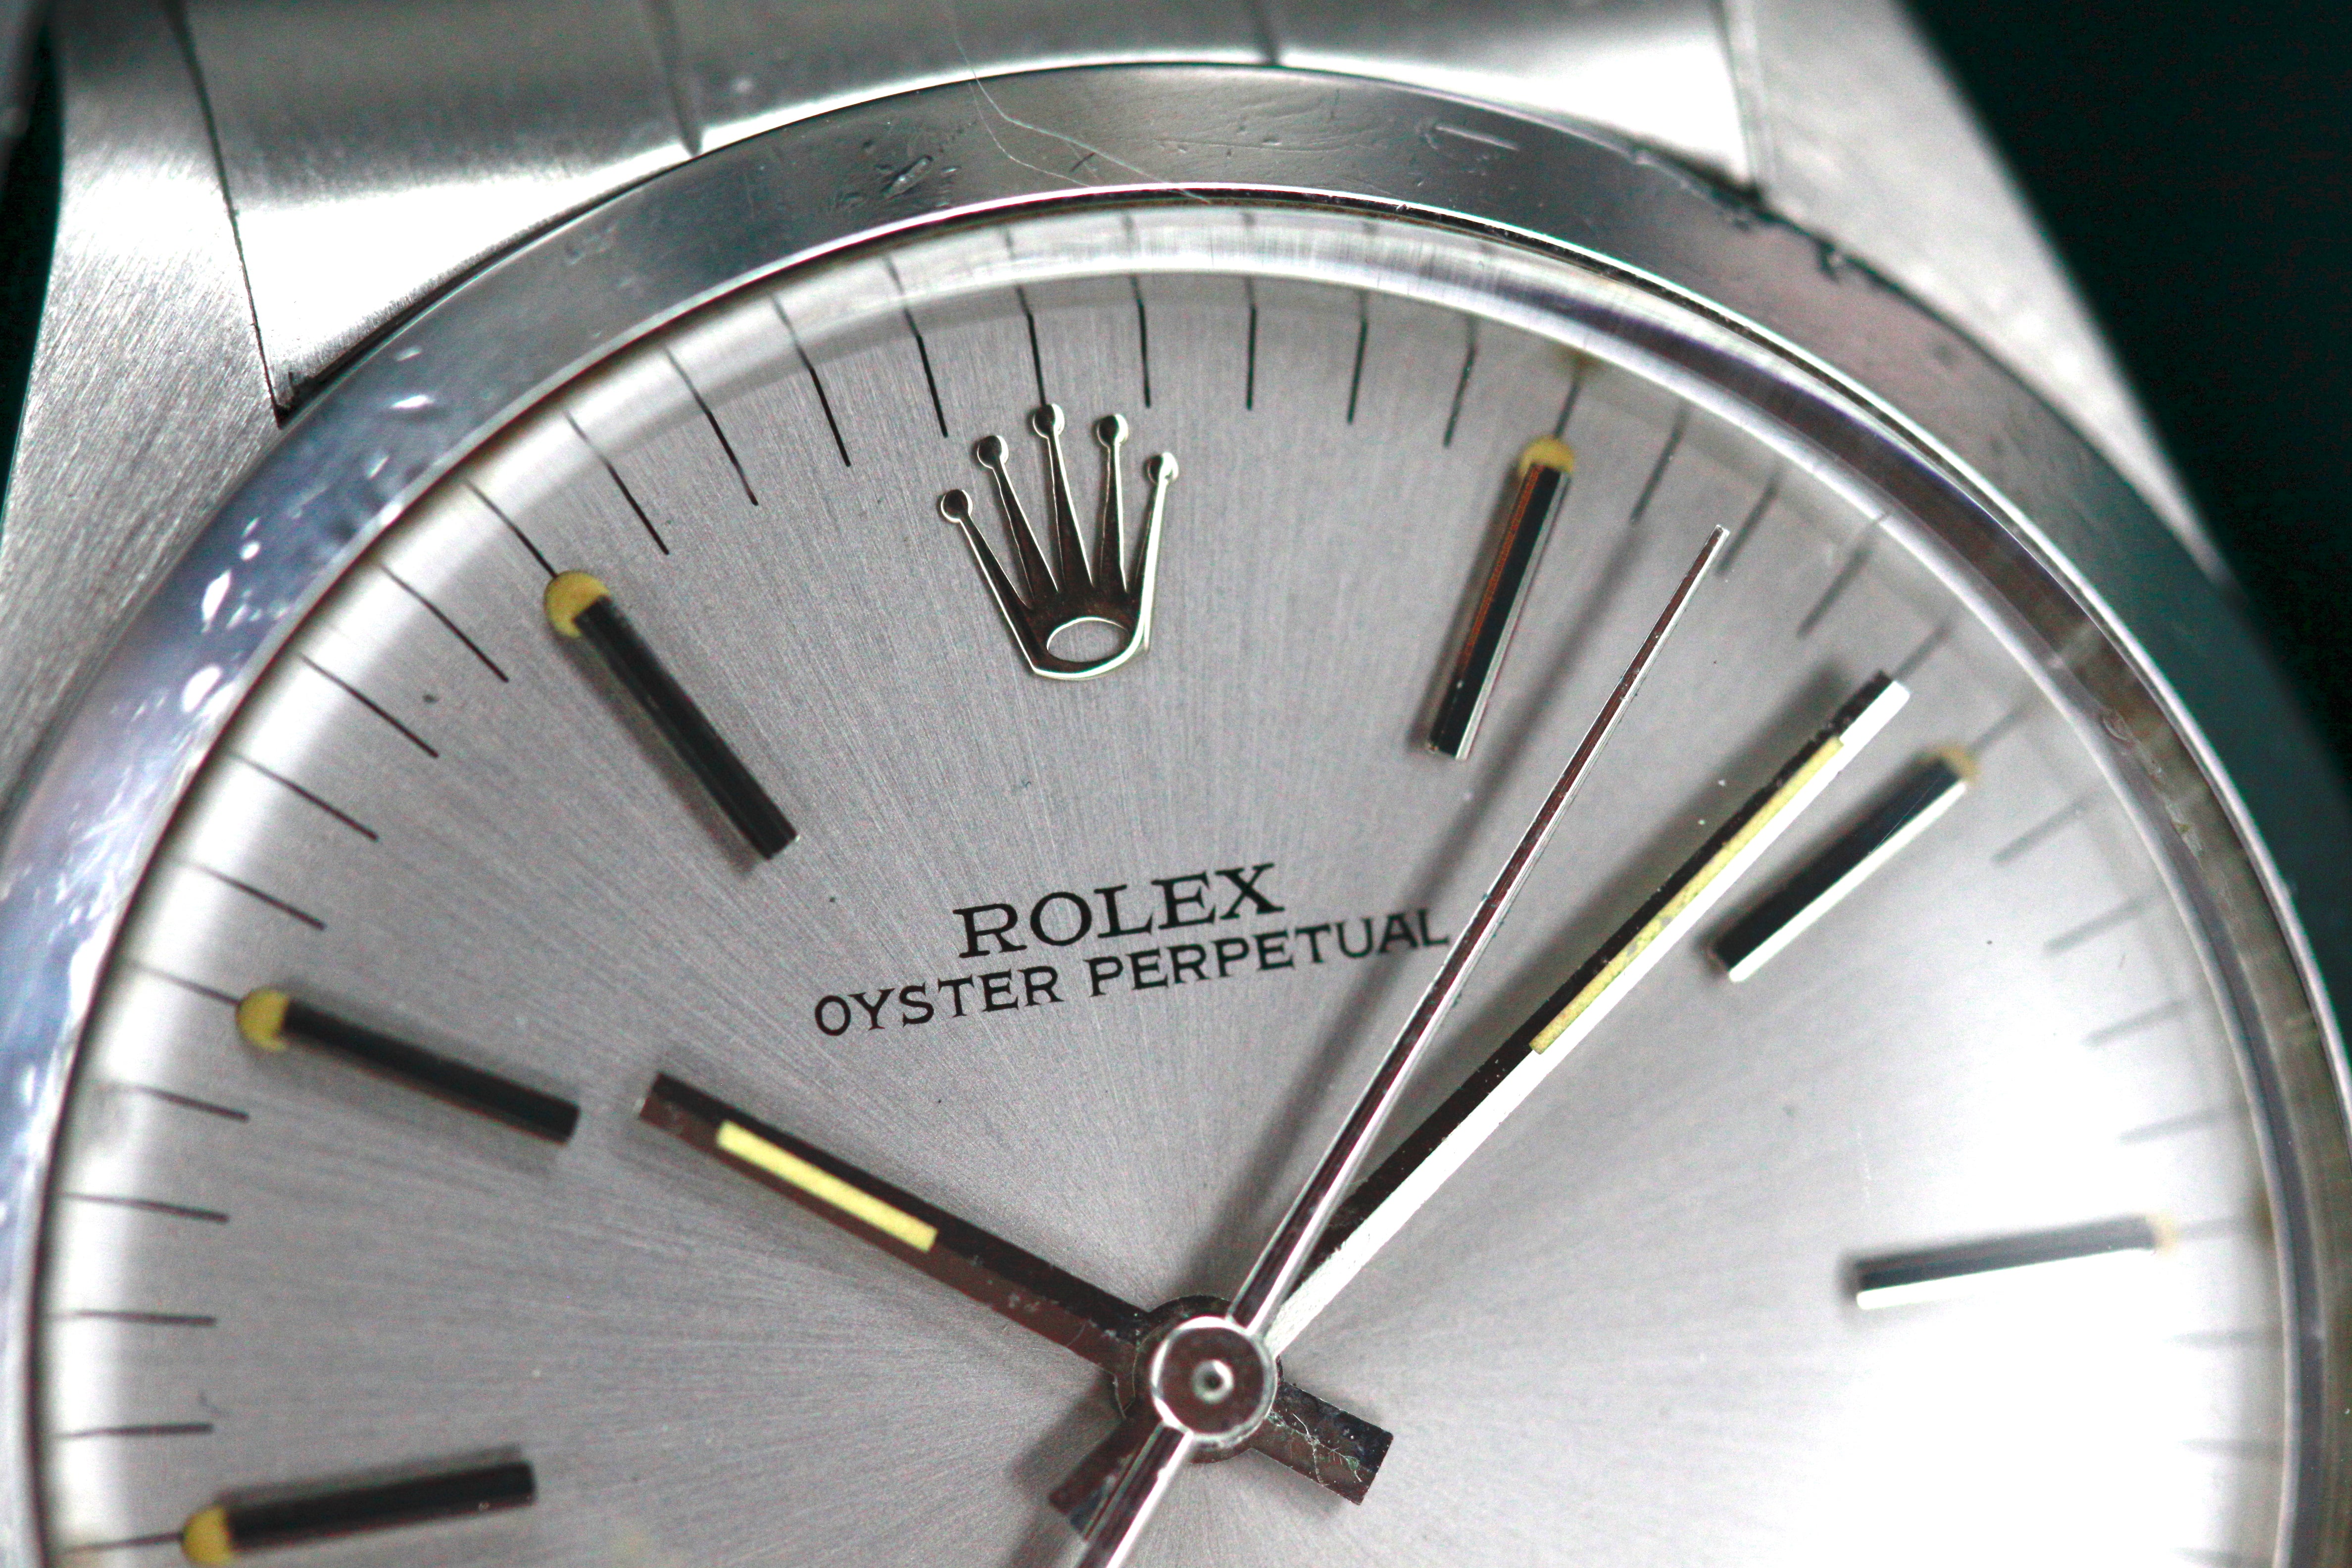 Rolex Oyster perpetual ref 1002 from 1987 AMAZING PATINA